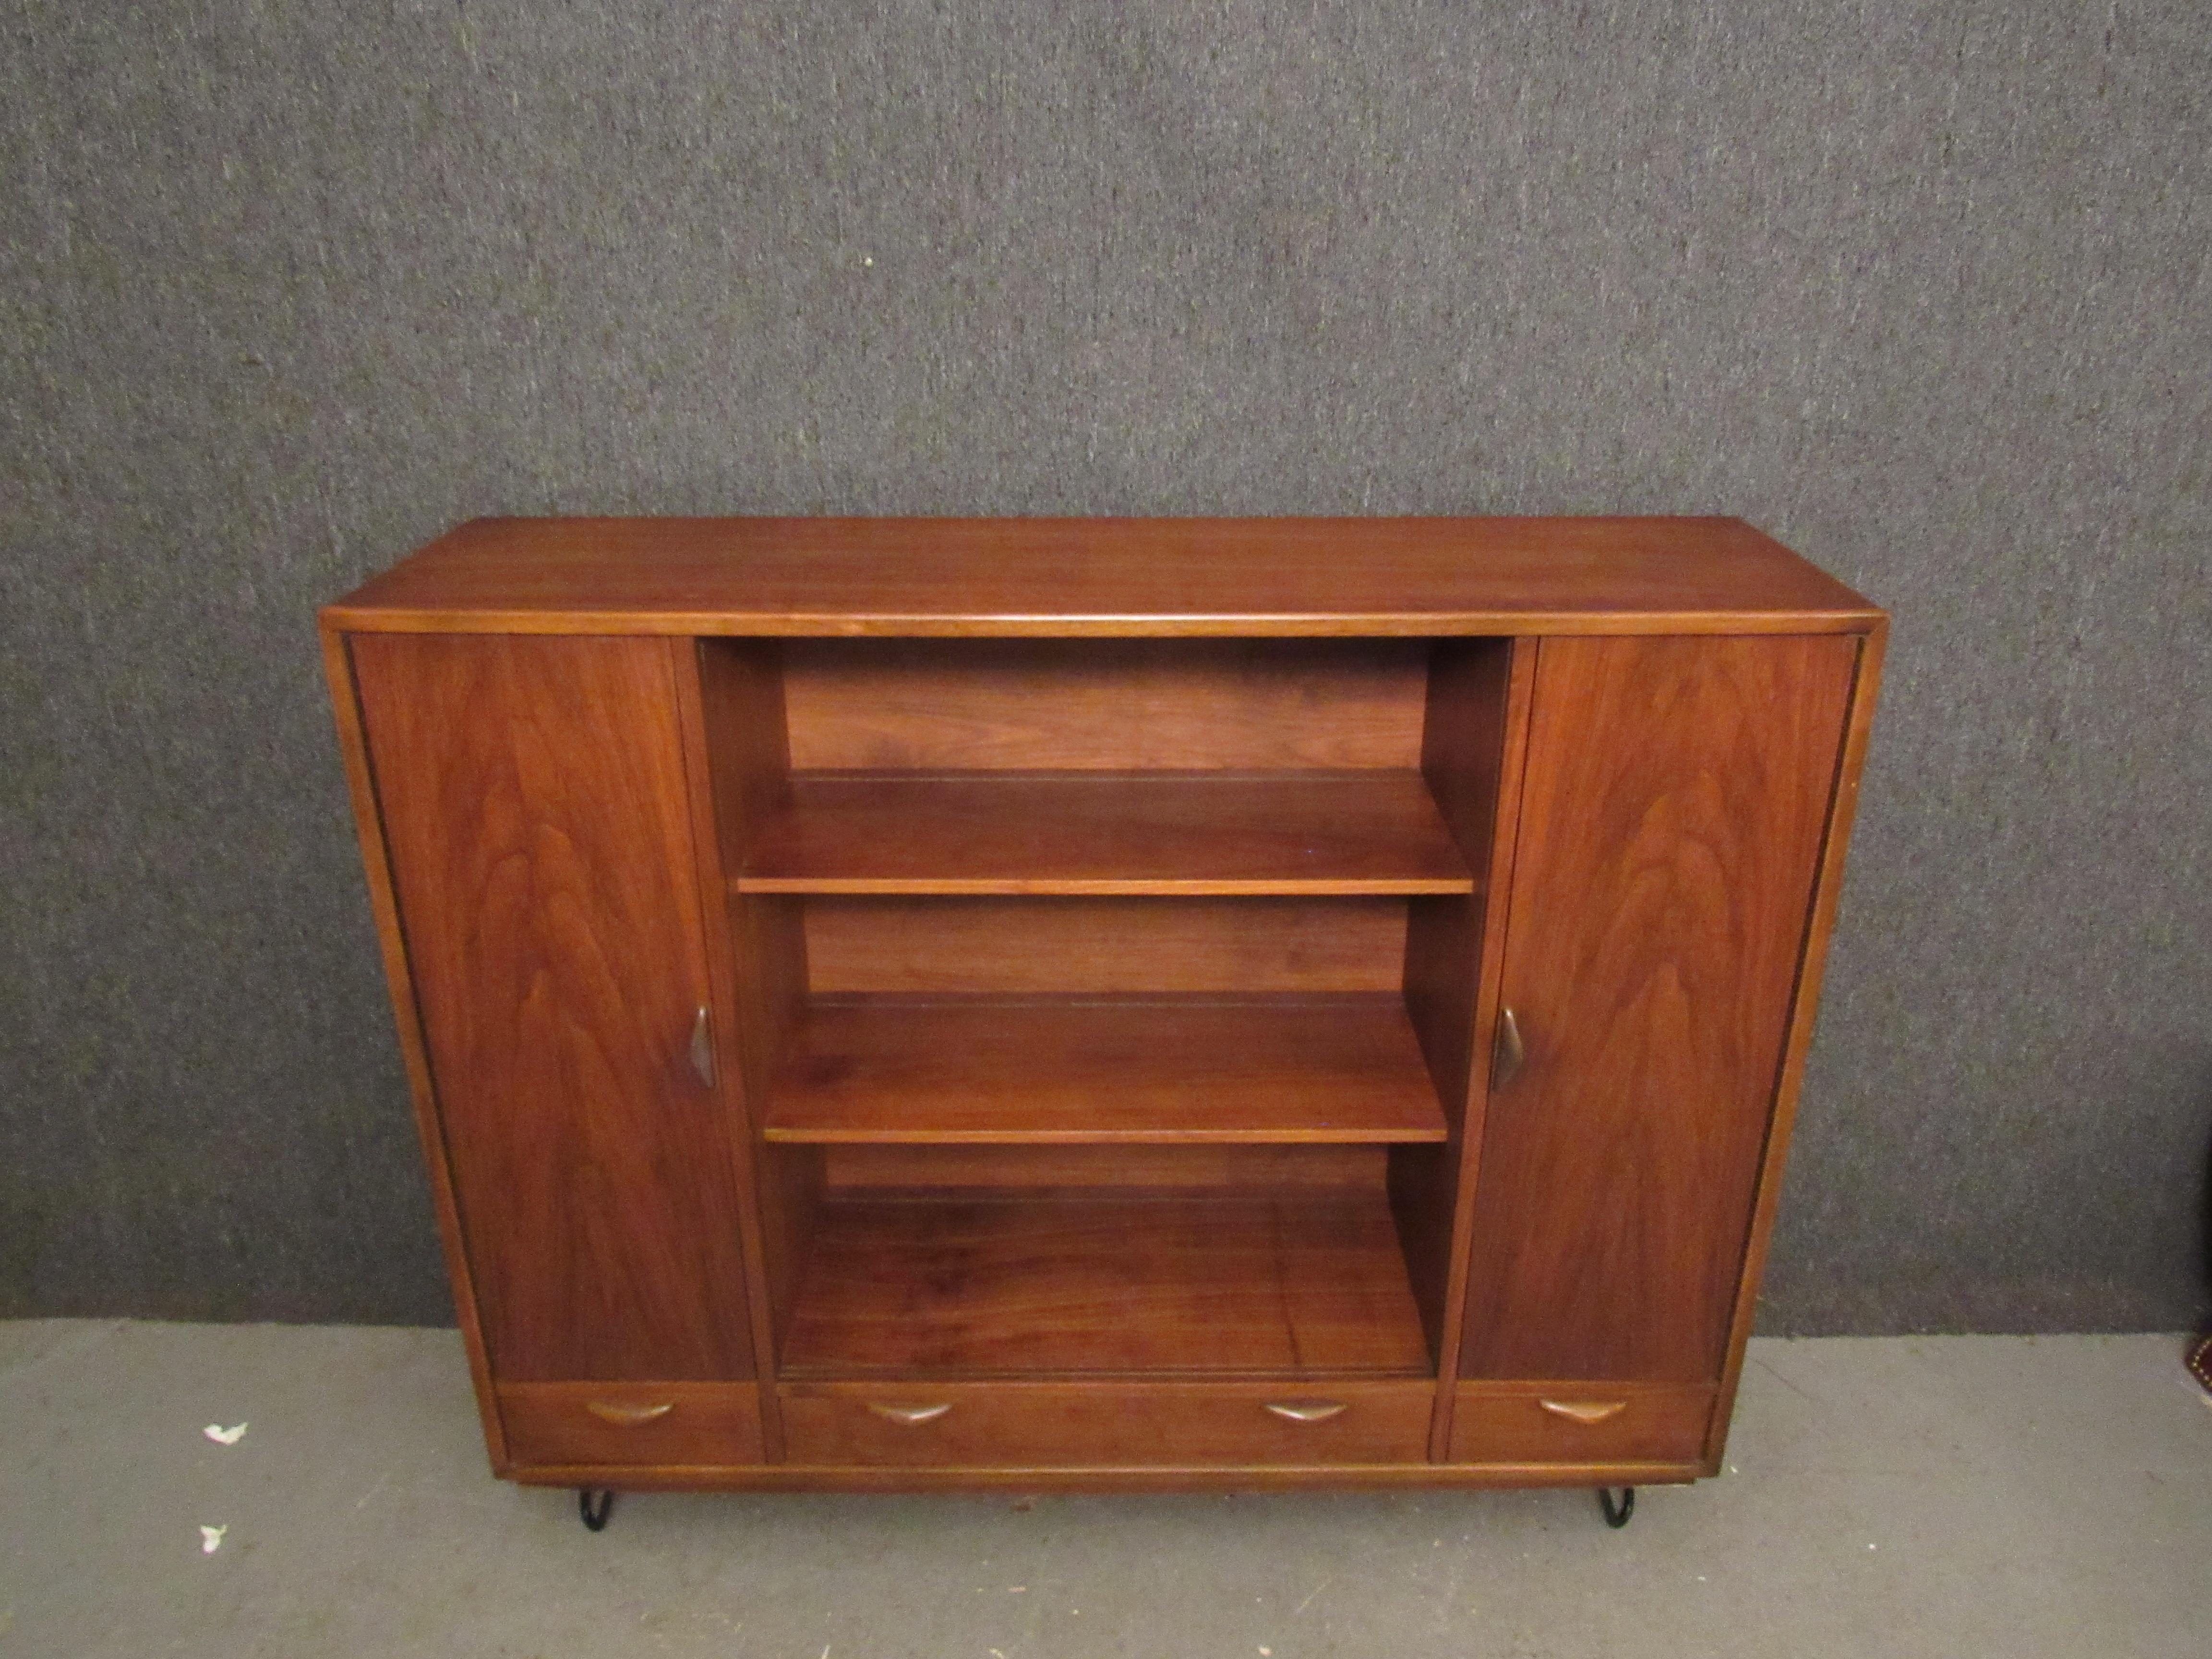 One of a kind piece from one of the most popular collections in American Mid-Century Modern design, the 